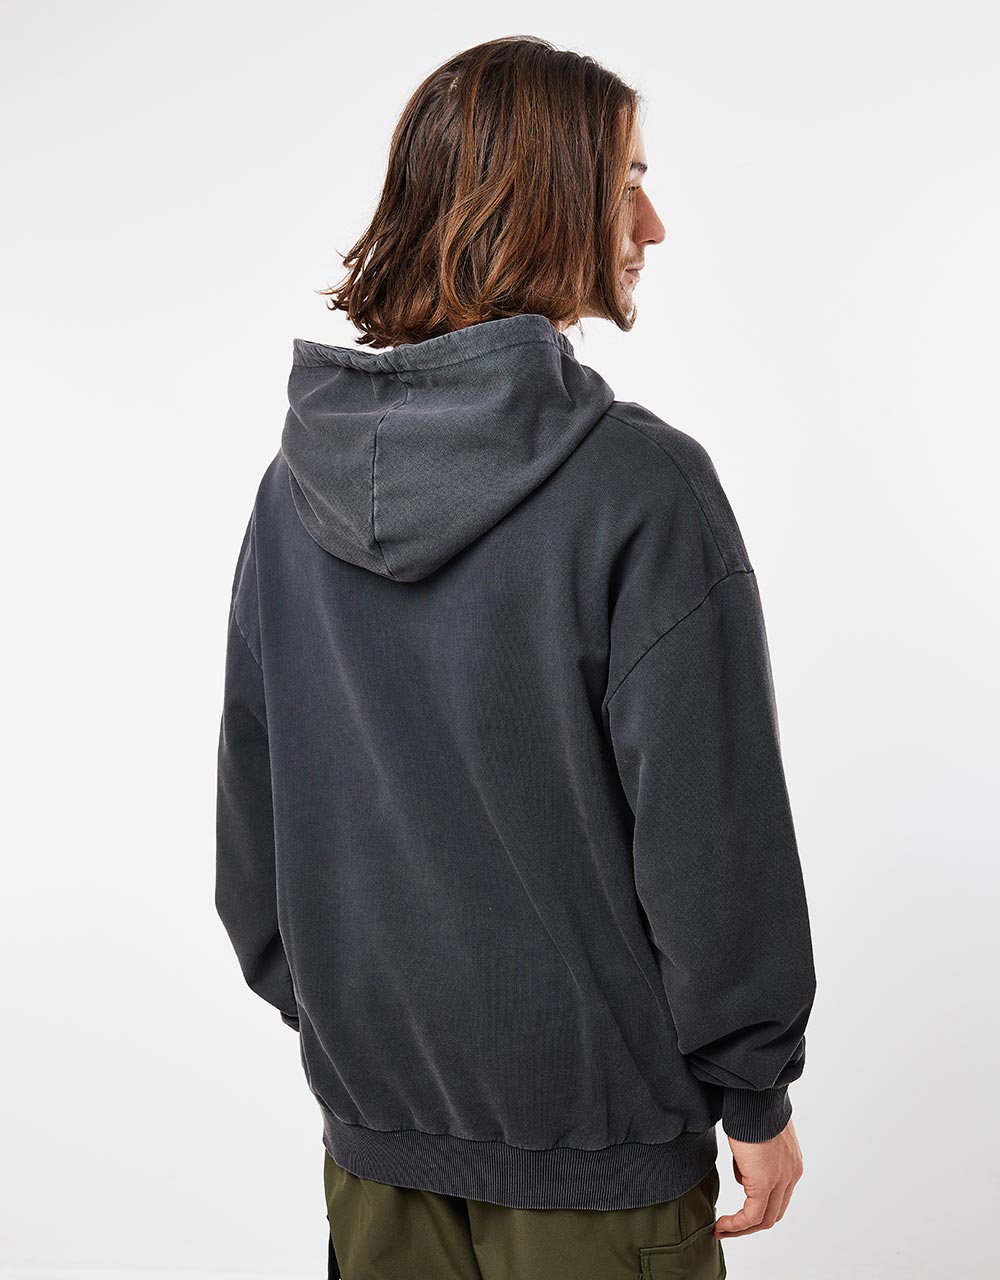 Method Signature Pullover Hoodie - Washed Black